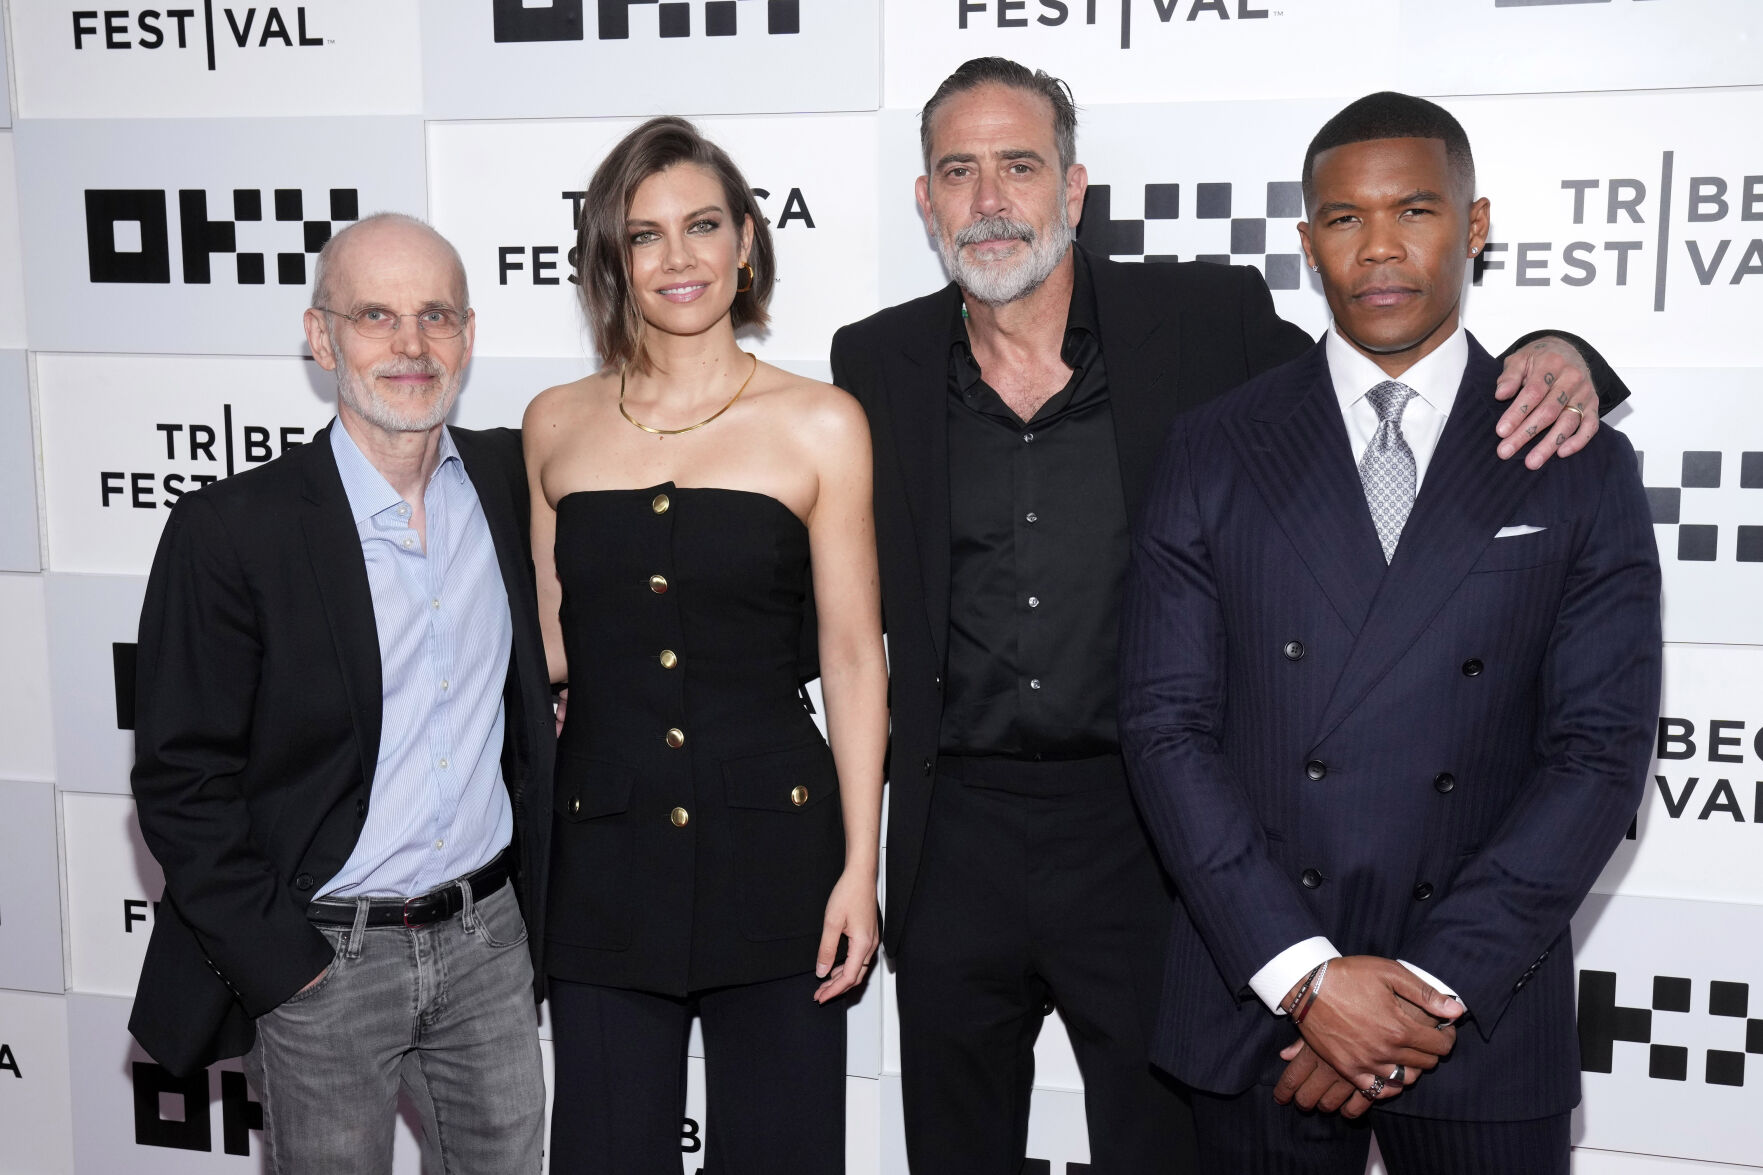 Zeljko Ivanek, from left, Lauren Cohan, Jeffrey Dean Morgan and Gaius Charles attend the premiere of "The Walking Dead: Dead City" at the BMCC Tribeca Performing Arts Center during the Tribeca Festival on Tuesday, June 13, 2023, in New York.